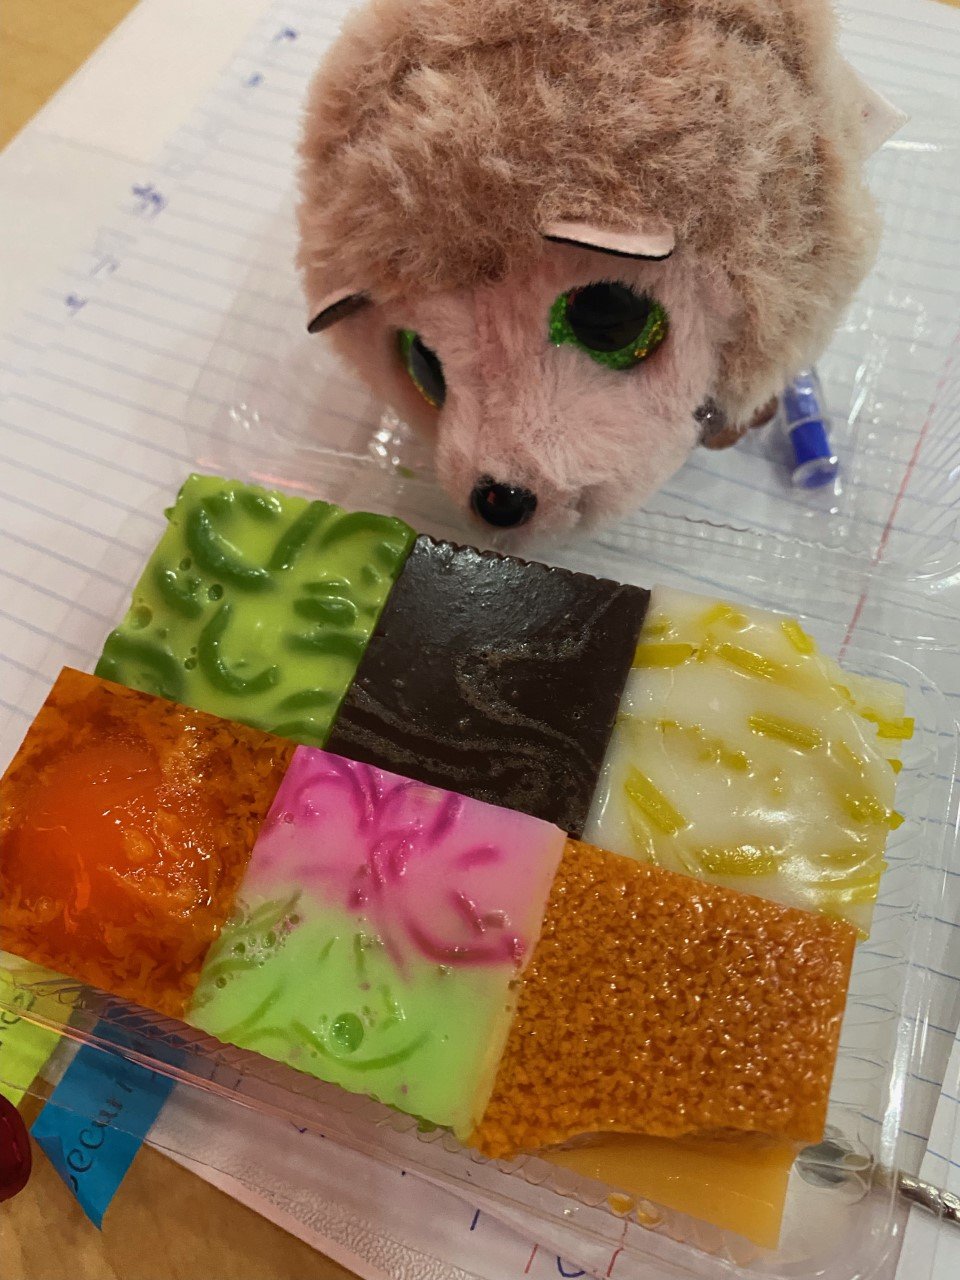 Hedgie and colorful delicacies